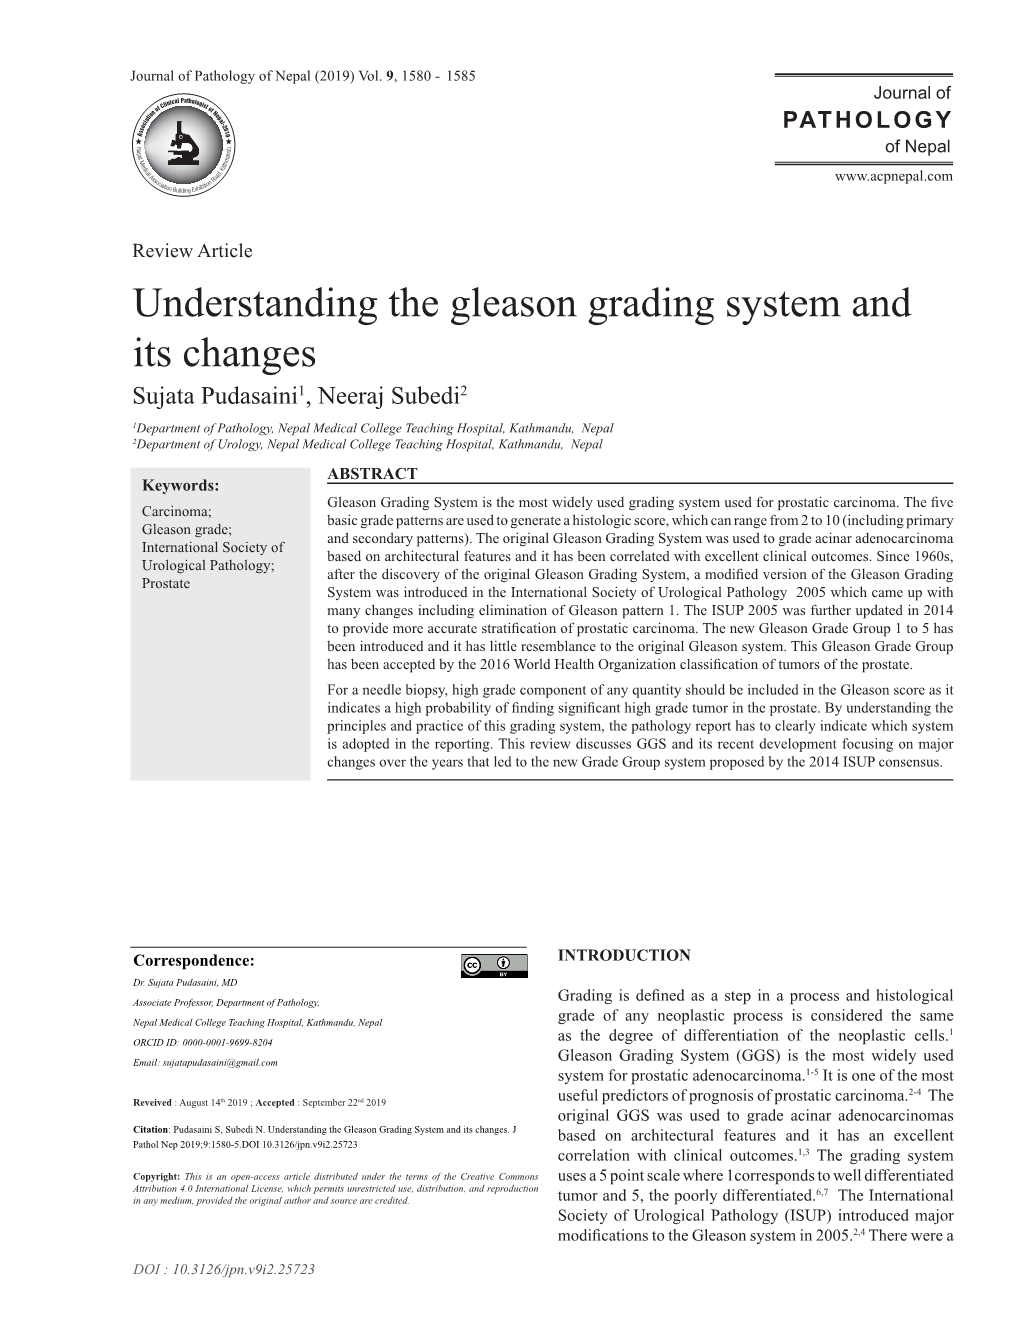 Understanding the Gleason Grading System and Its Changes